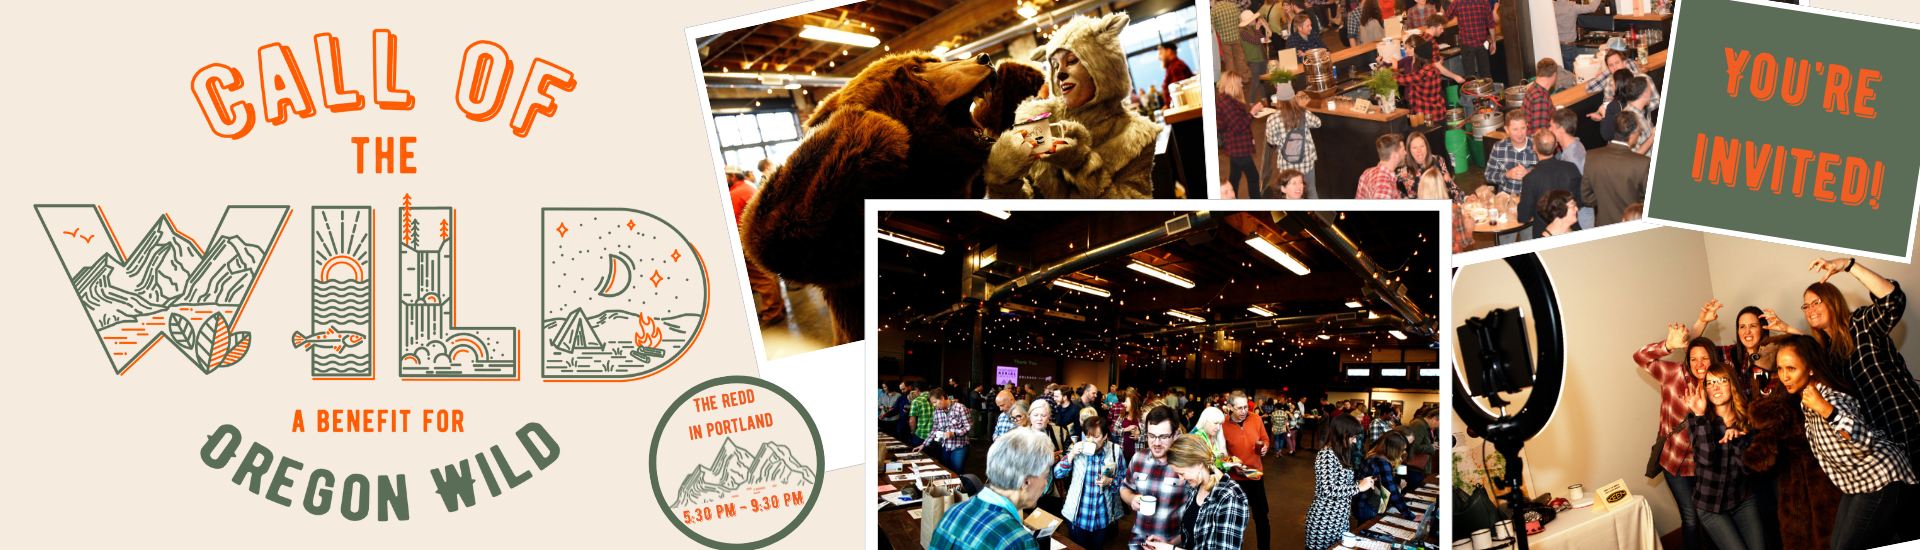 Call of the Wild, an annual benefit for Oregon Wild. Friday, October 14th, 5:30pm at the Redd in Portland